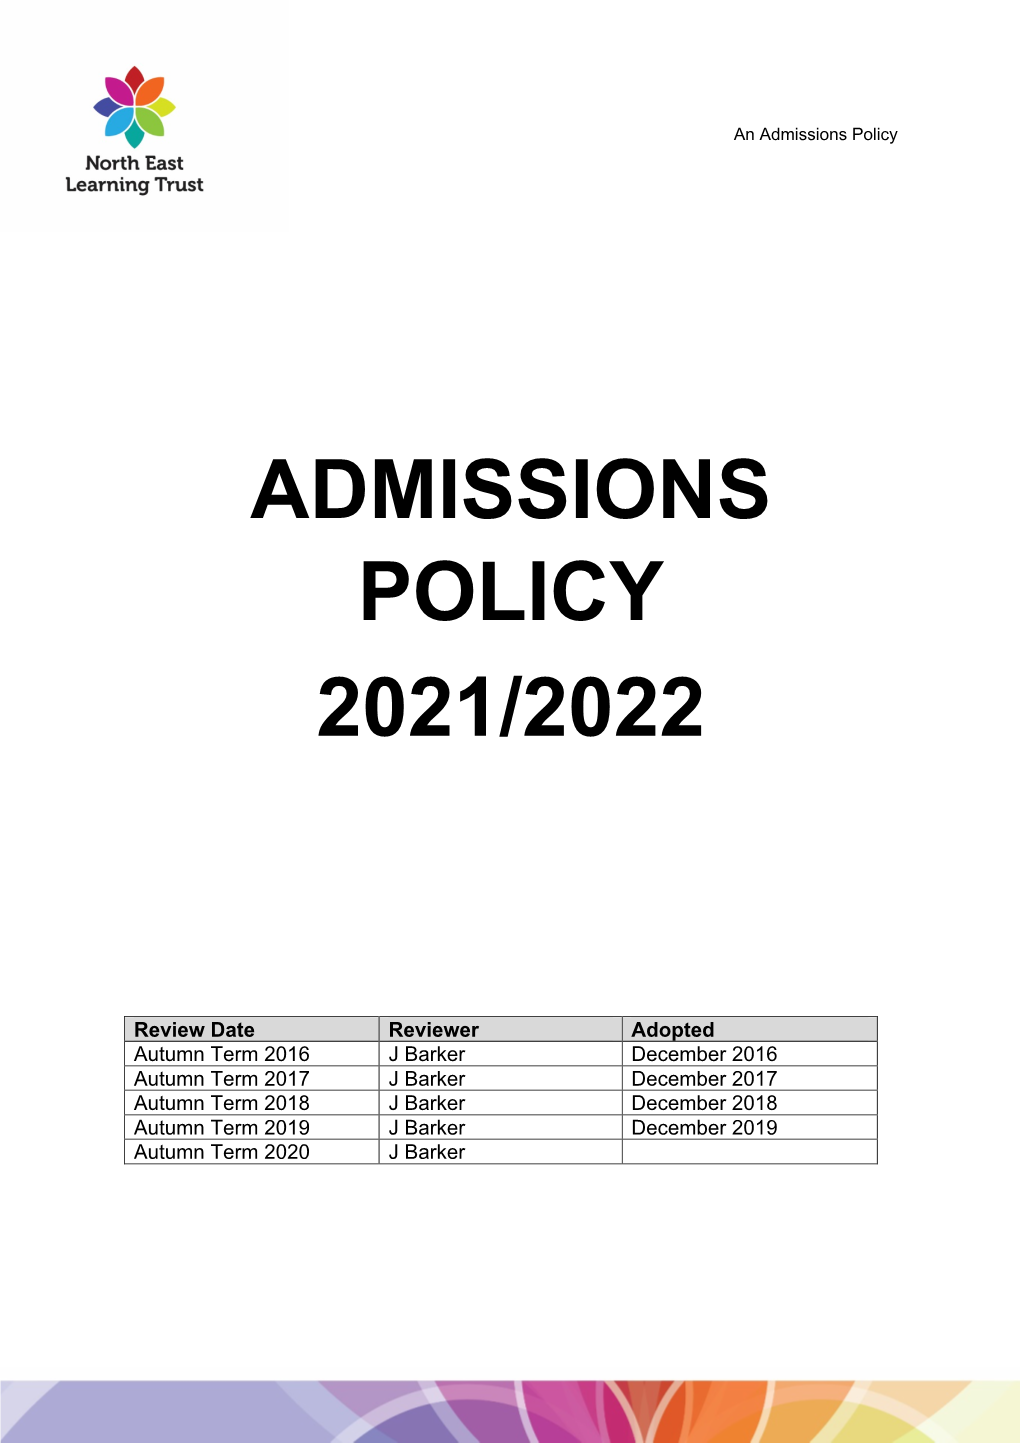 NELT Admissions Policy